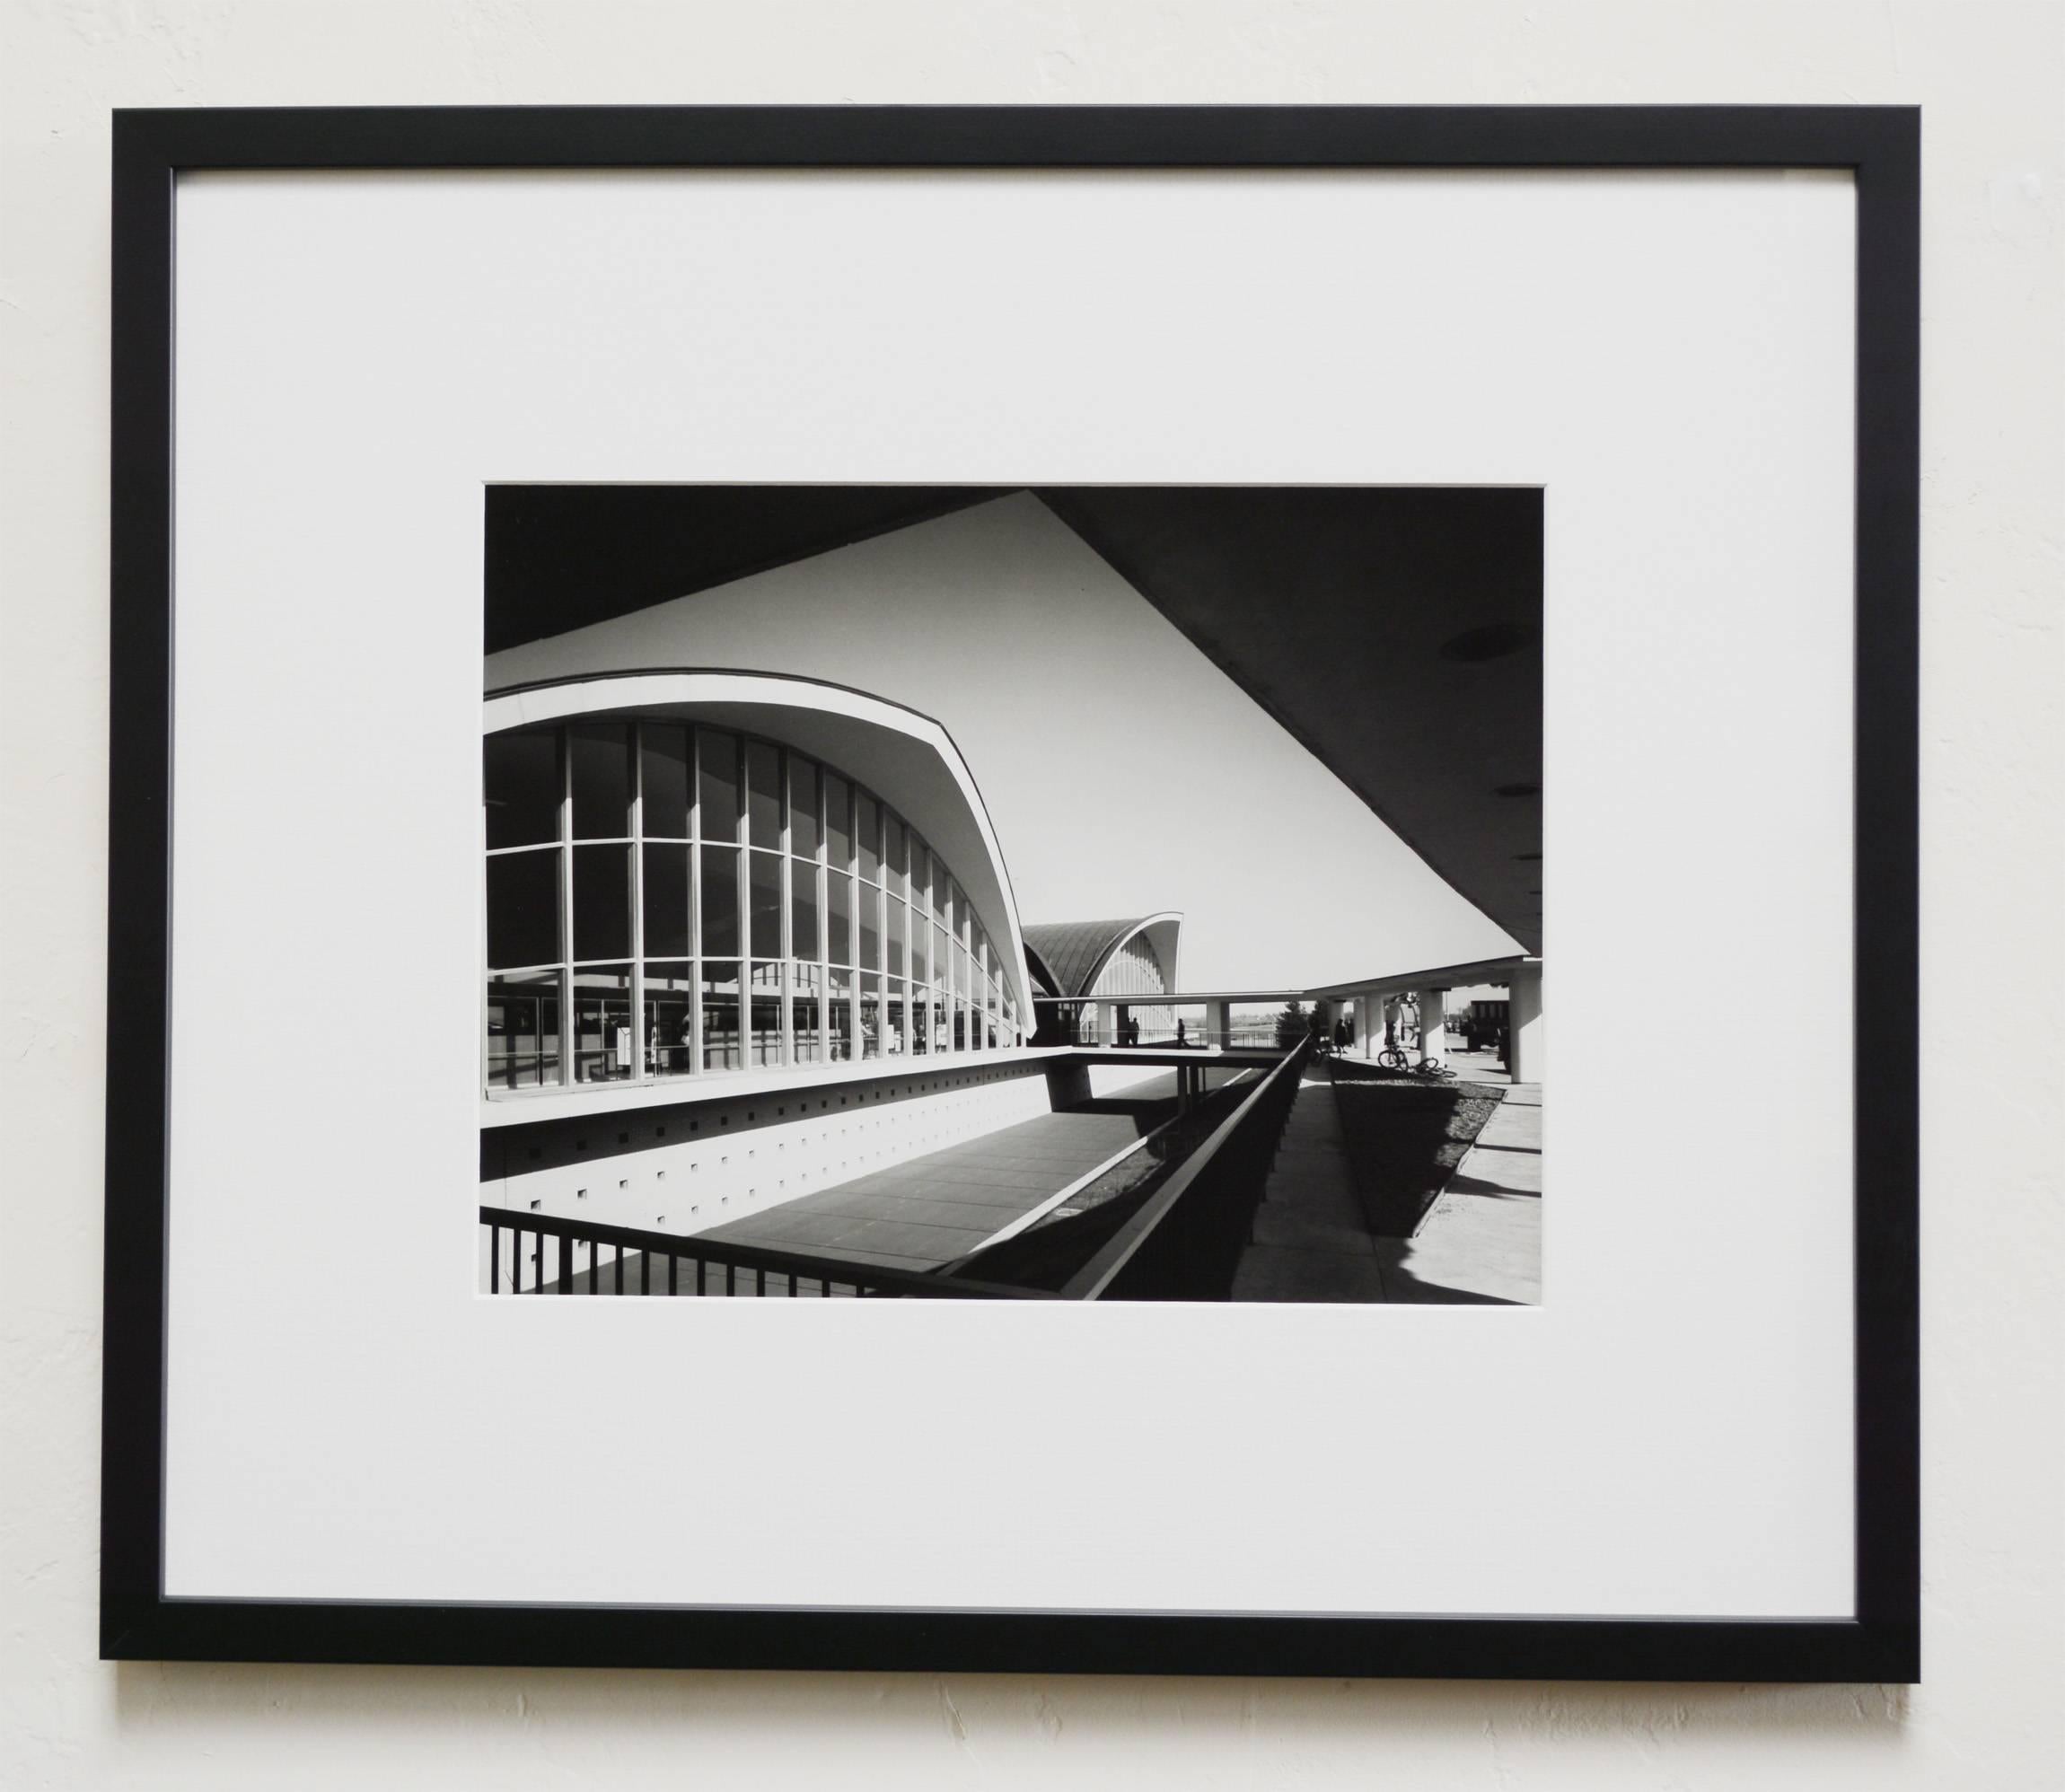 Vintage photo of the main terminal at the St. Louis International Airport taken by Ezra Stoller. This building was designed by Minoru Yamasaki in 1956. This photo is from a portfolio of photos from the architects office. The photo has Ezra Stoller's